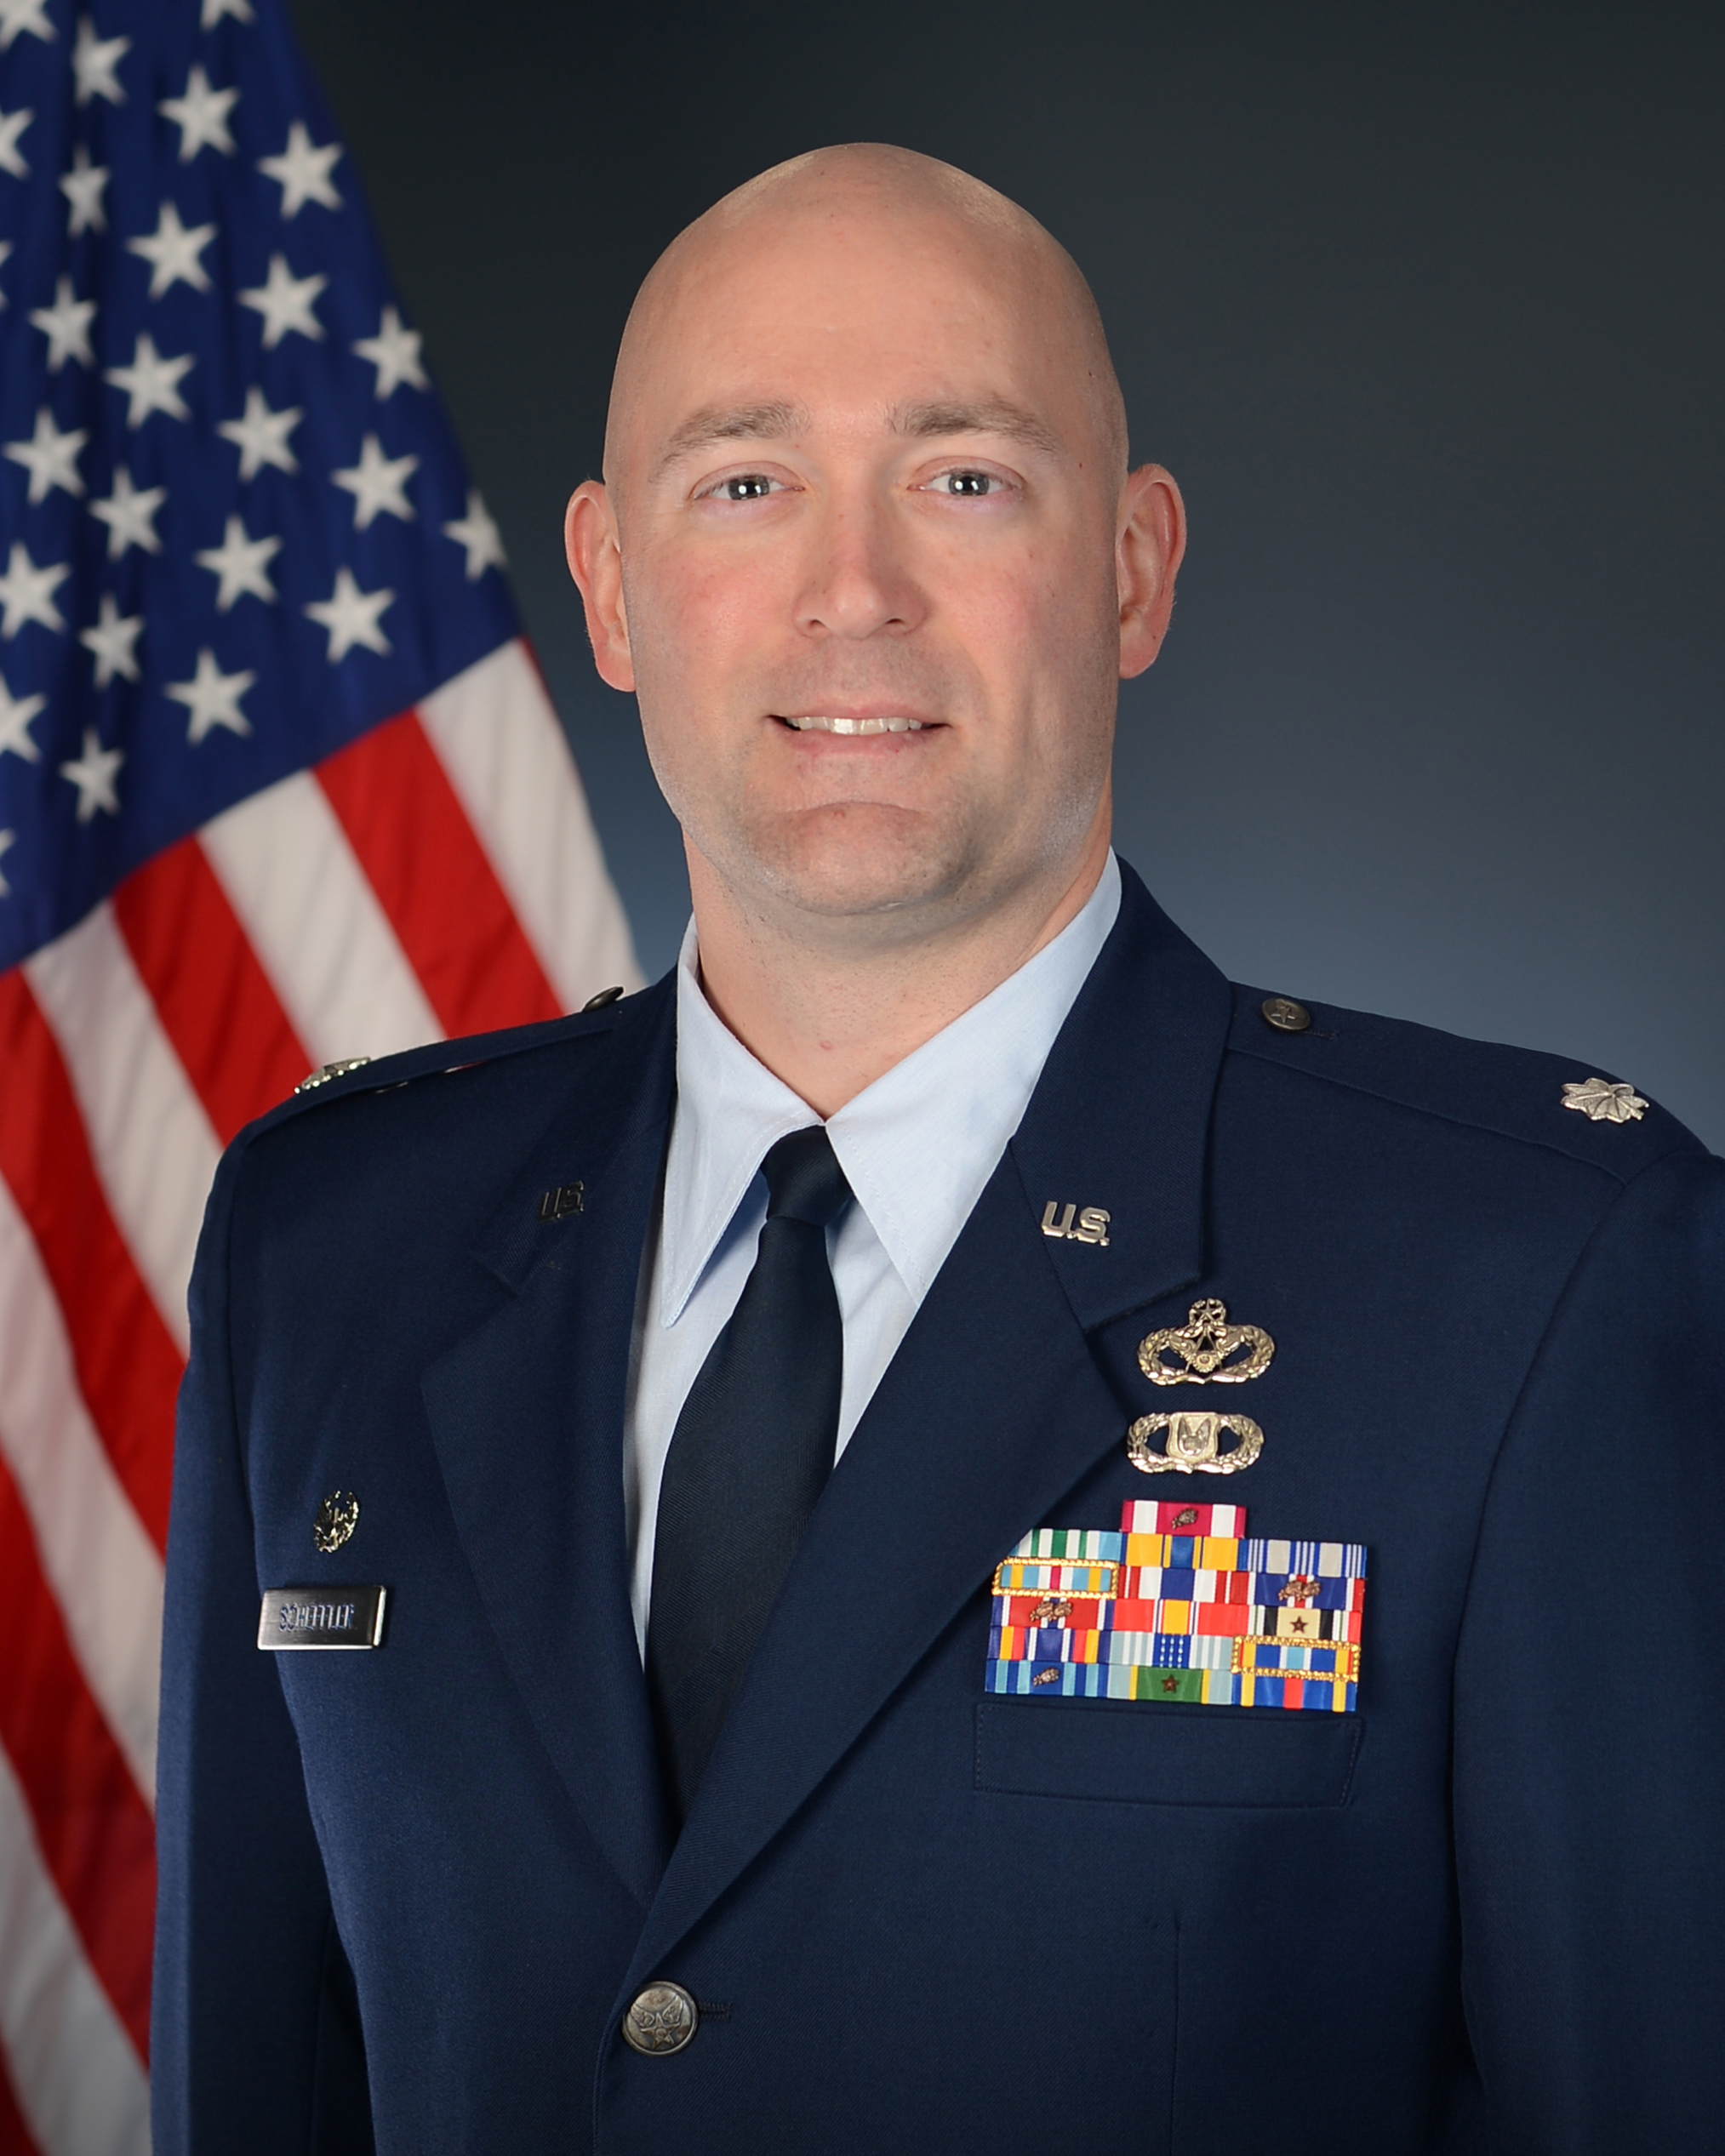 Lt. Colonel Timothy Scheffler official photo with American flag